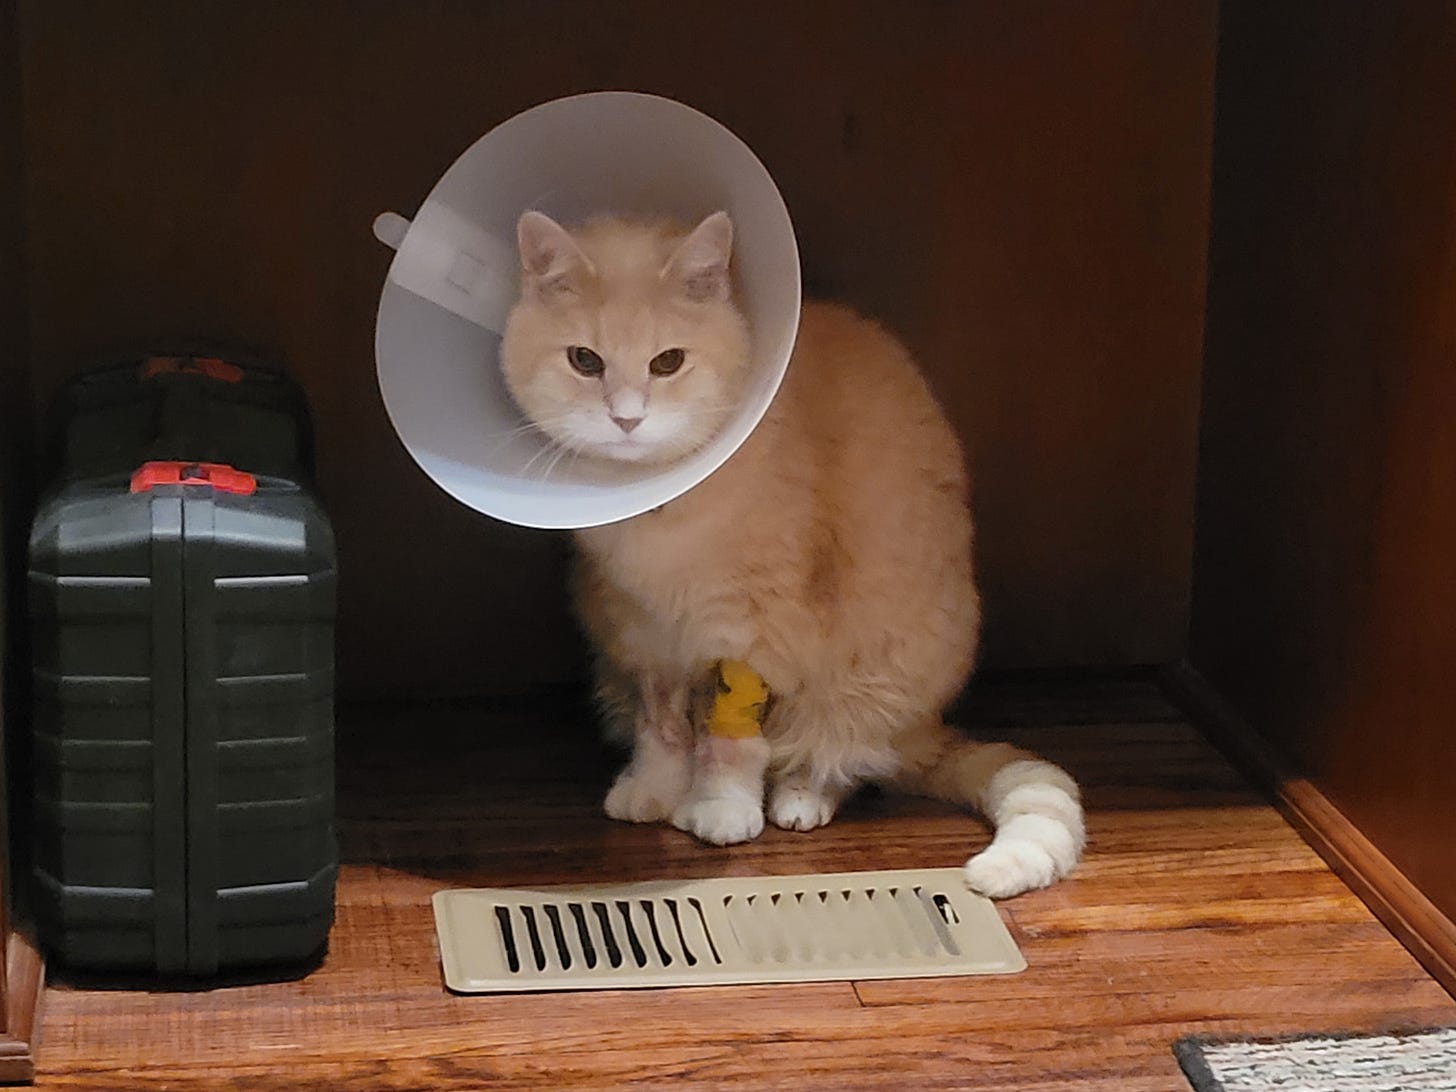 A ginger cat with a bandage on one arm wearing a cone looks at the camera with emotions like anger and betrayal.